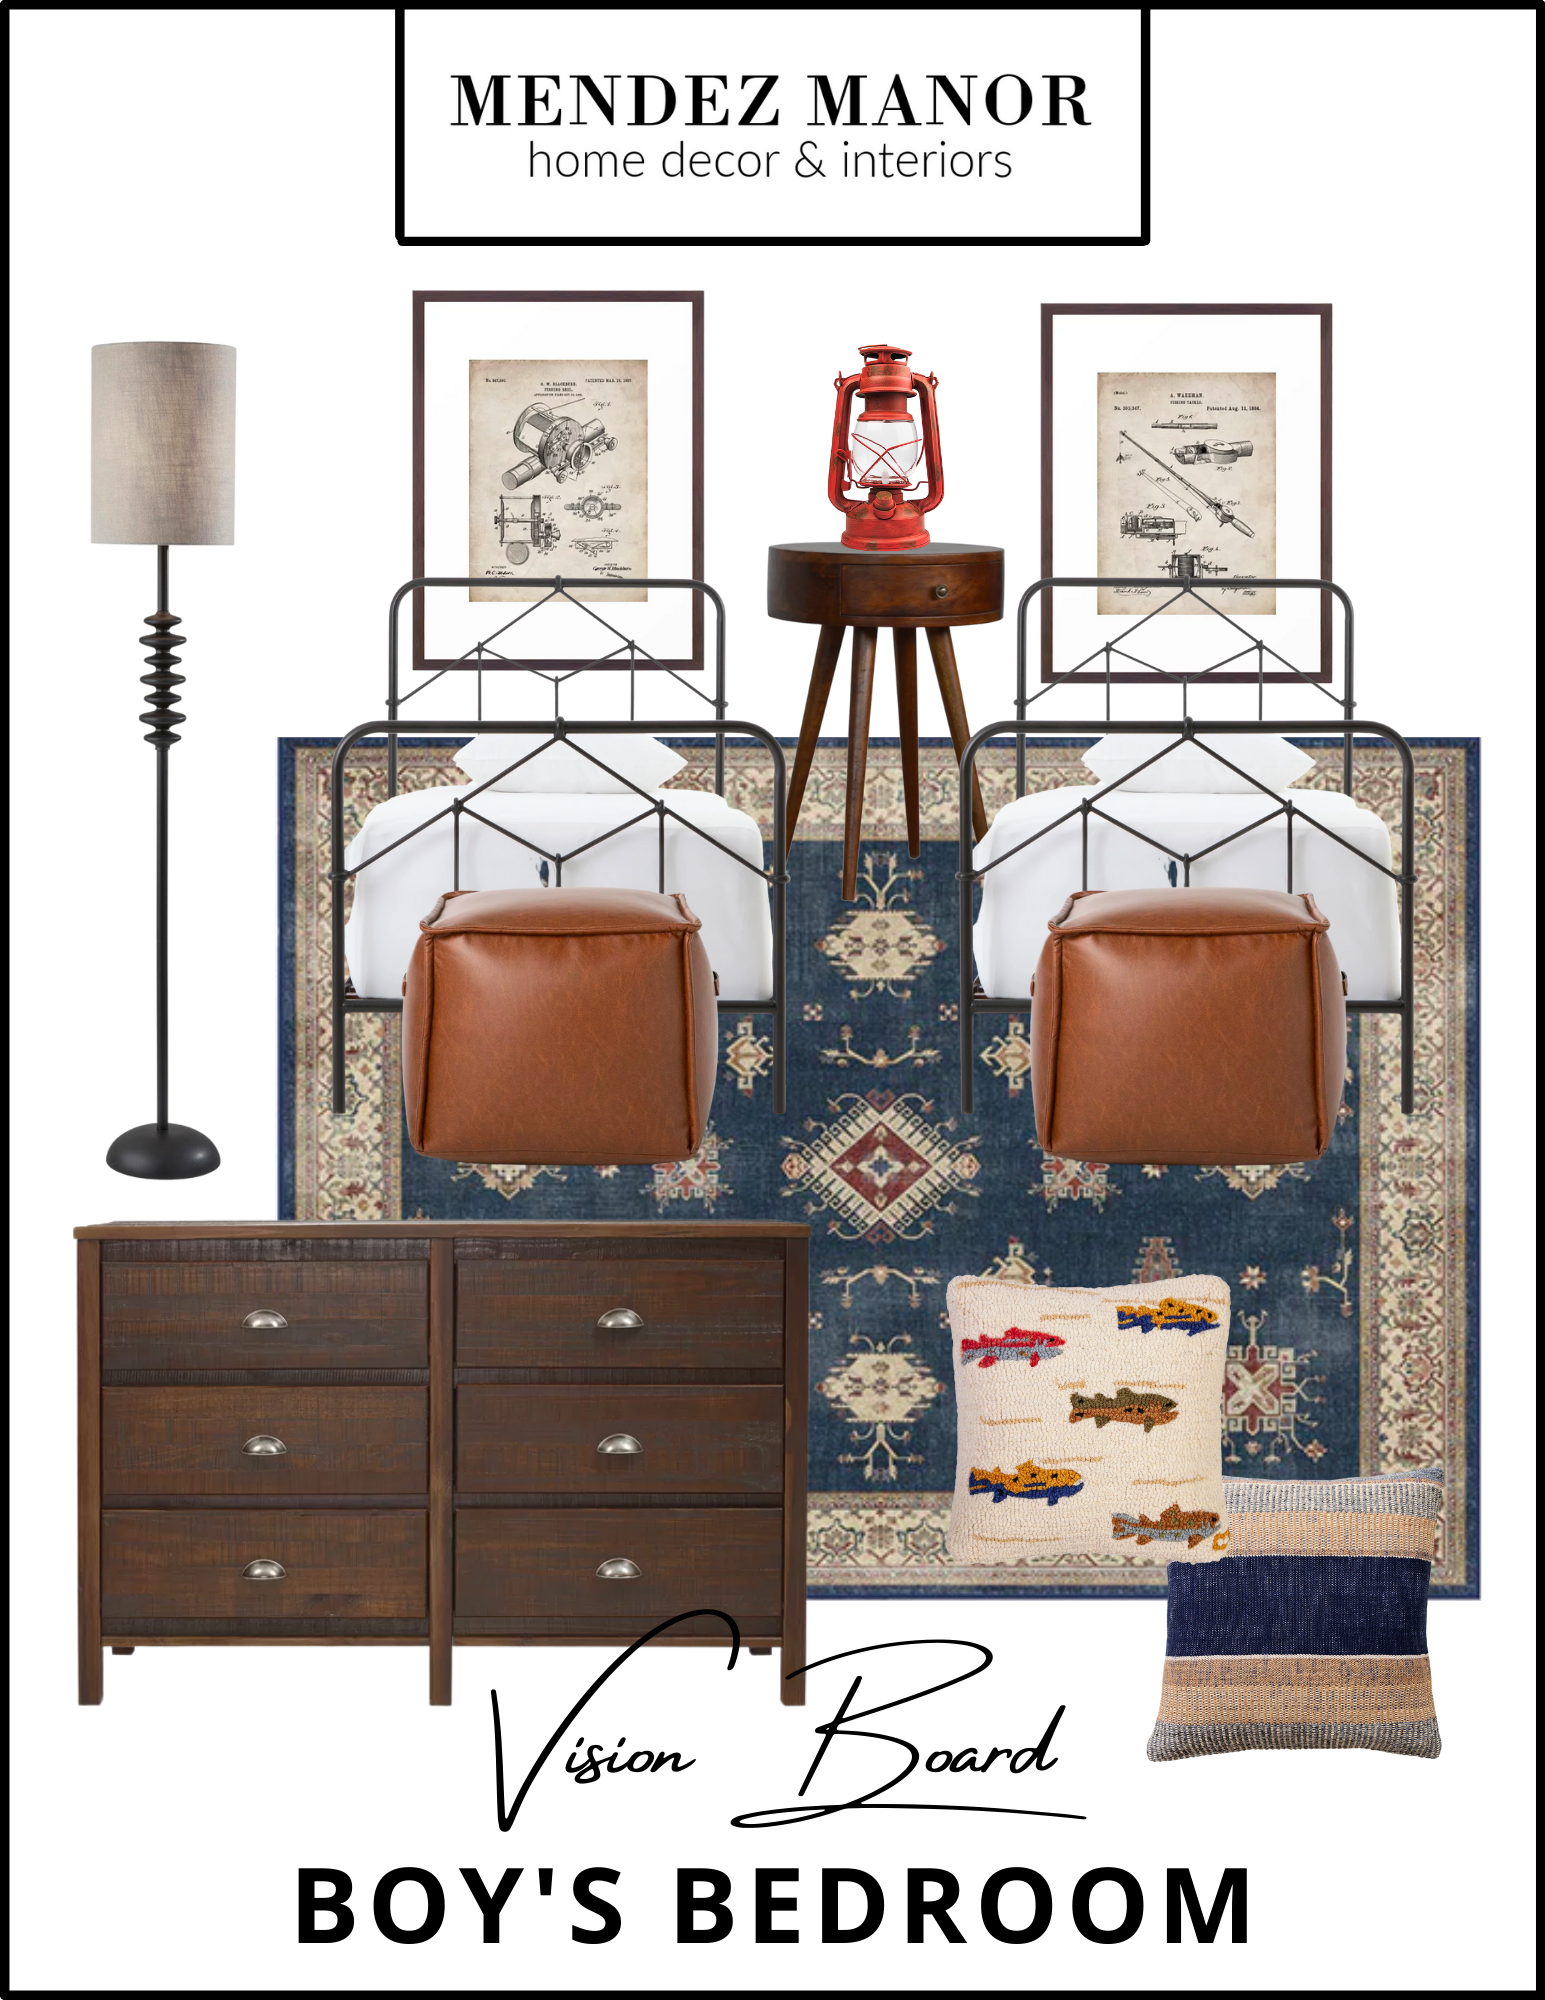 Fishing Themed Boy's Bedroom Design with Rustic Accents